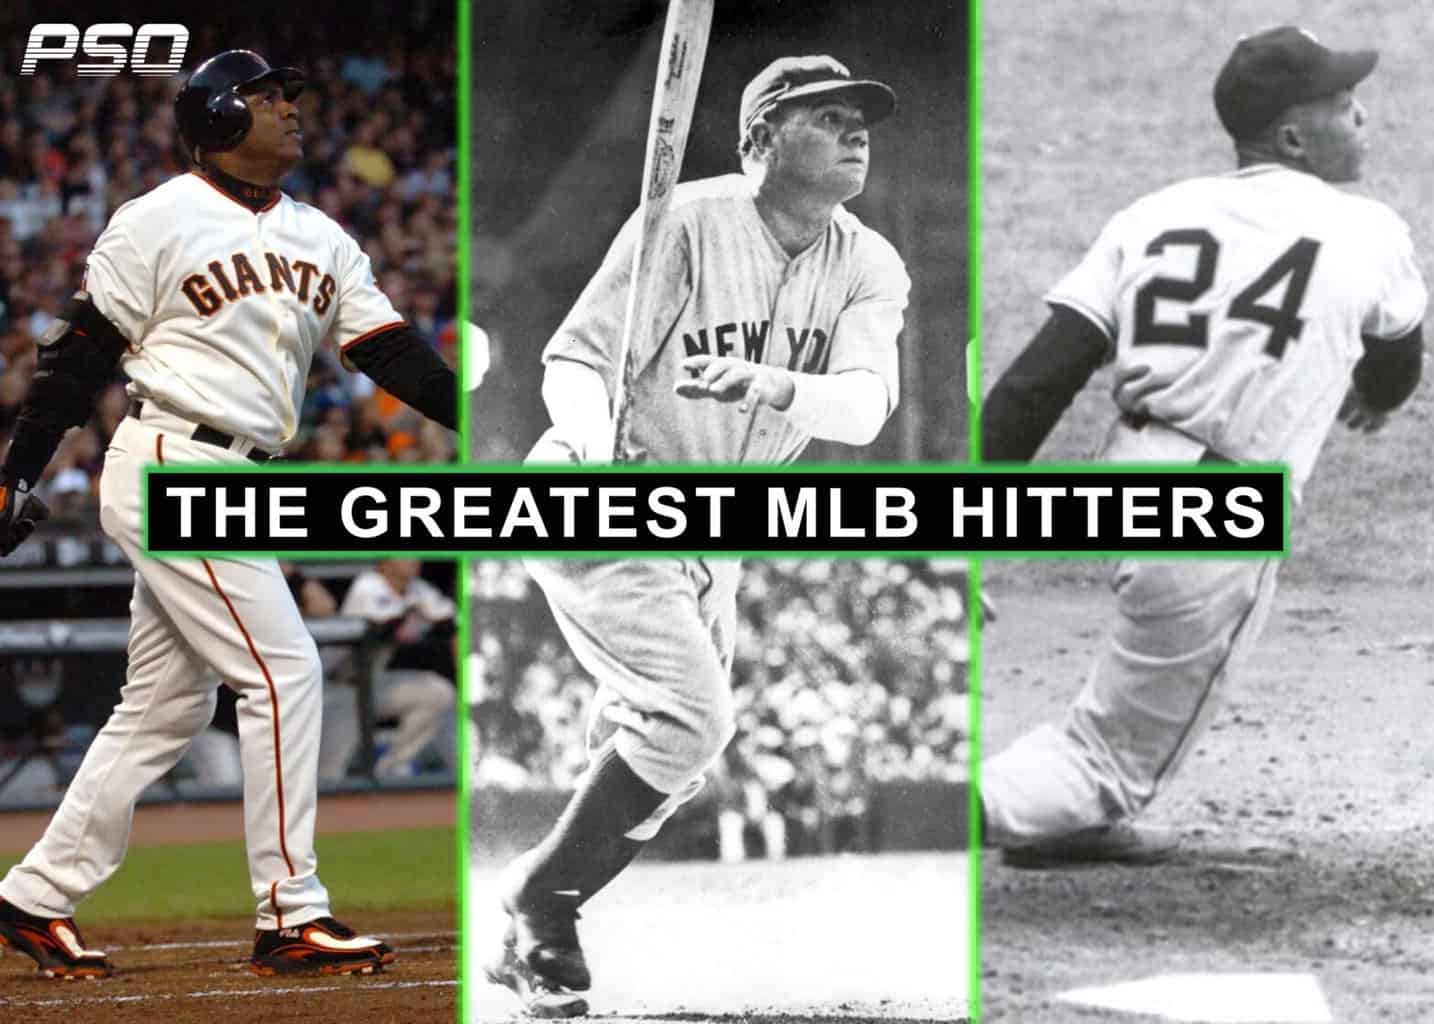 WHO IS THE GREATEST BASEBALL PLAYER OF ALL TIME?? 